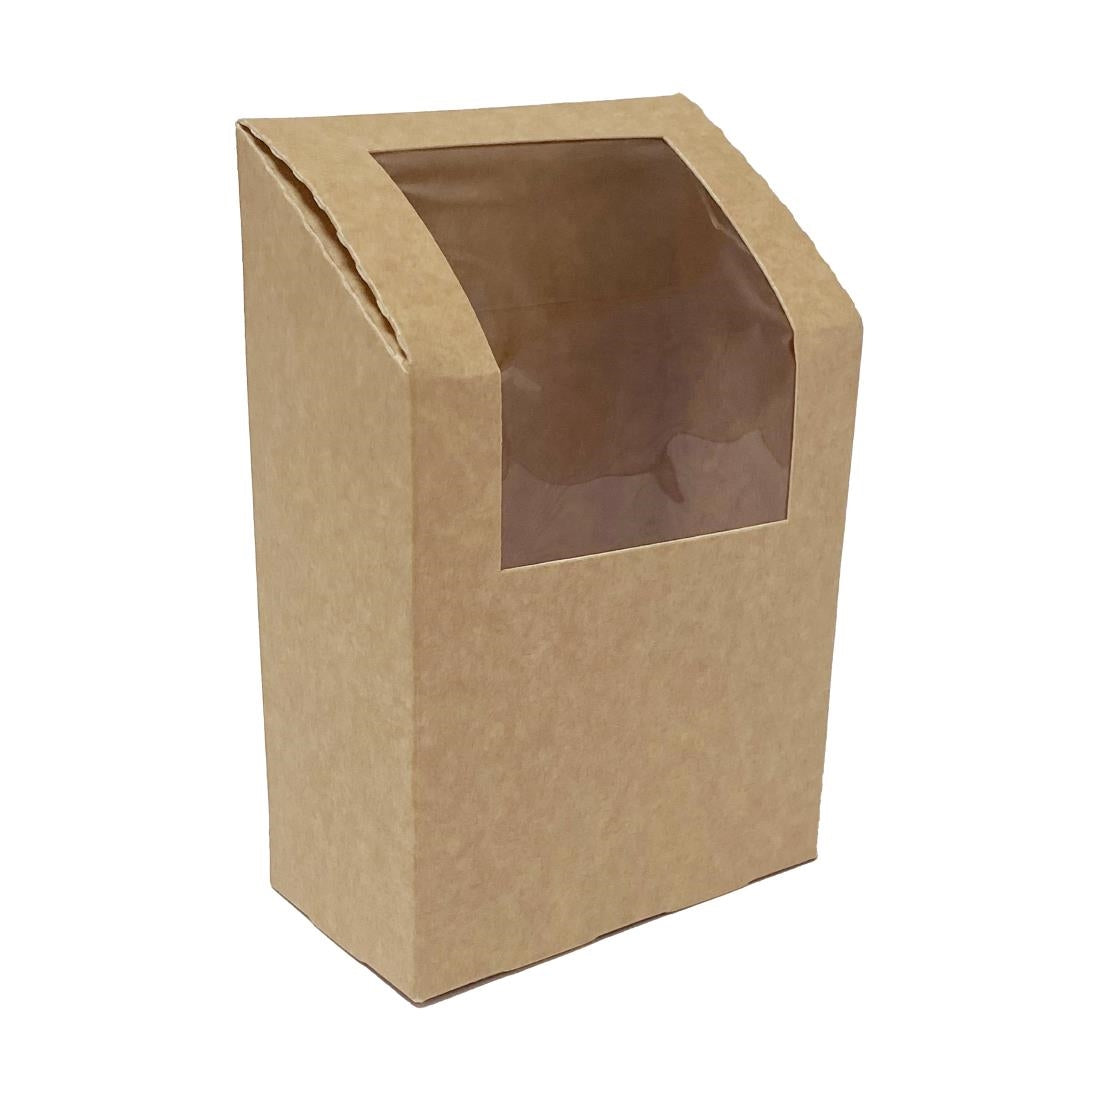 FT653 Fiesta Recyclable Wrap Box with PET Window (Pack of 500) JD Catering Equipment Solutions Ltd